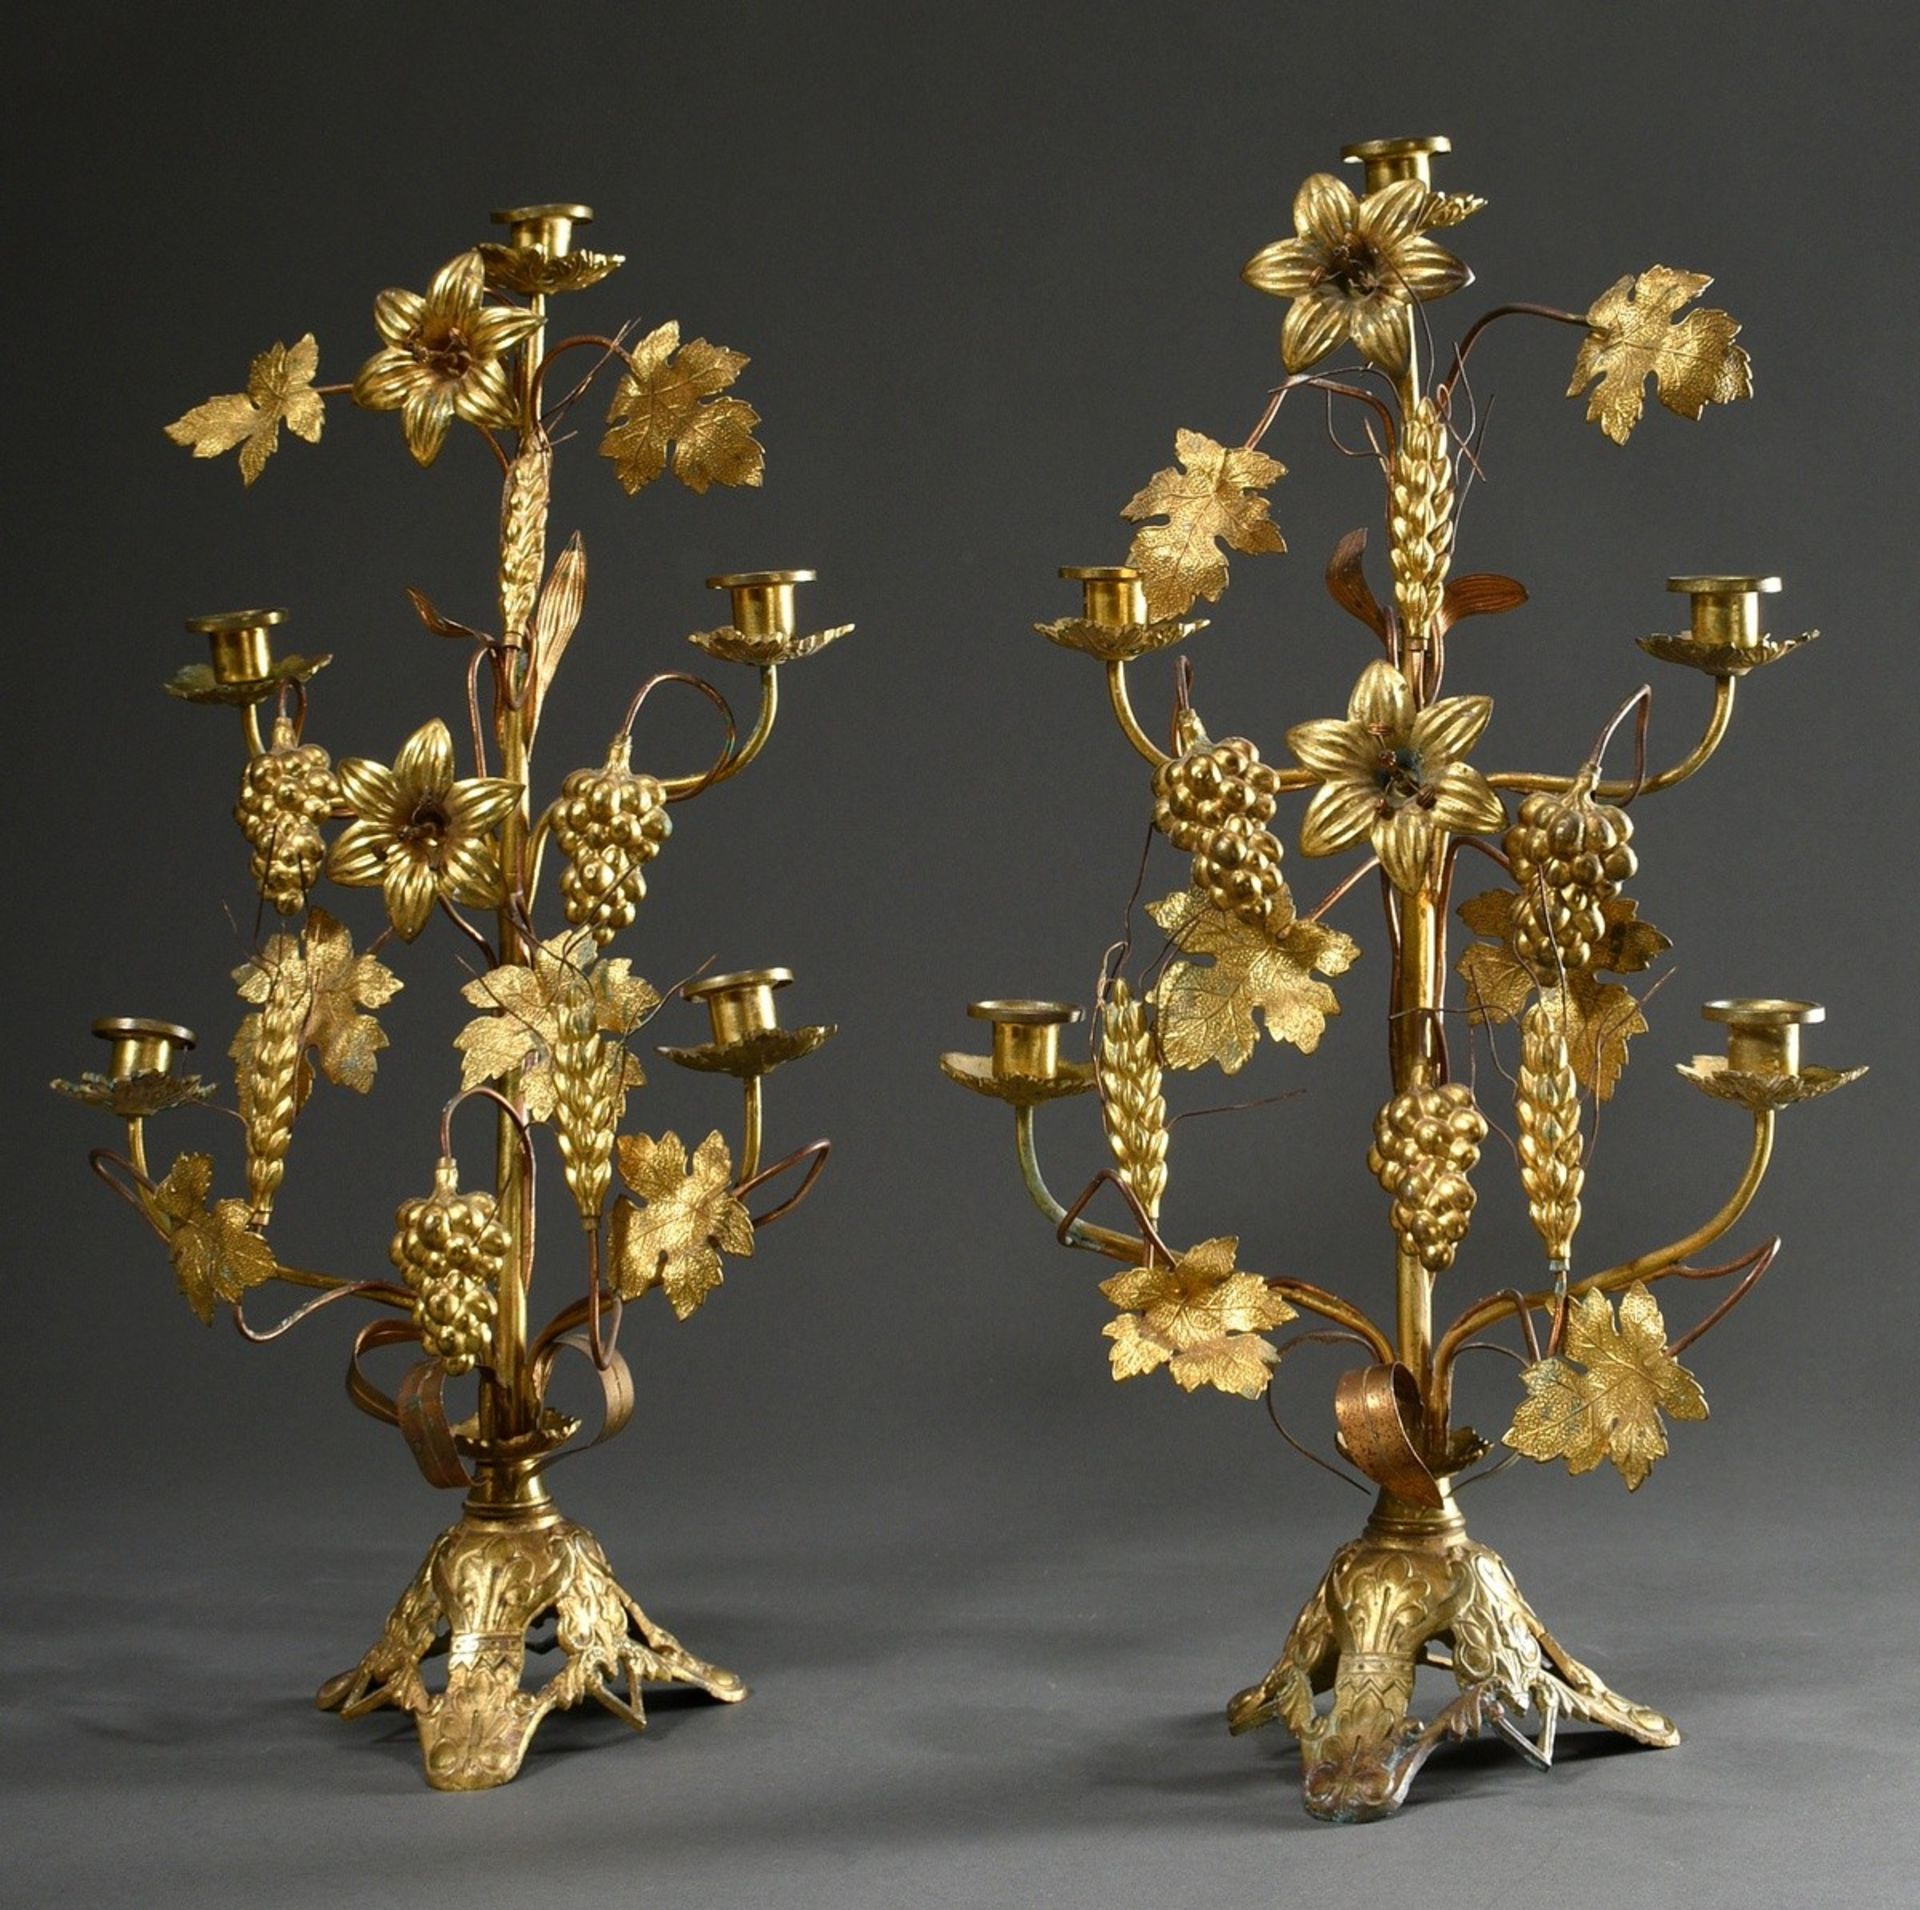 Pair of Marian or altar candlesticks with sculptural lily blossoms, grapes and ears of grain on orn